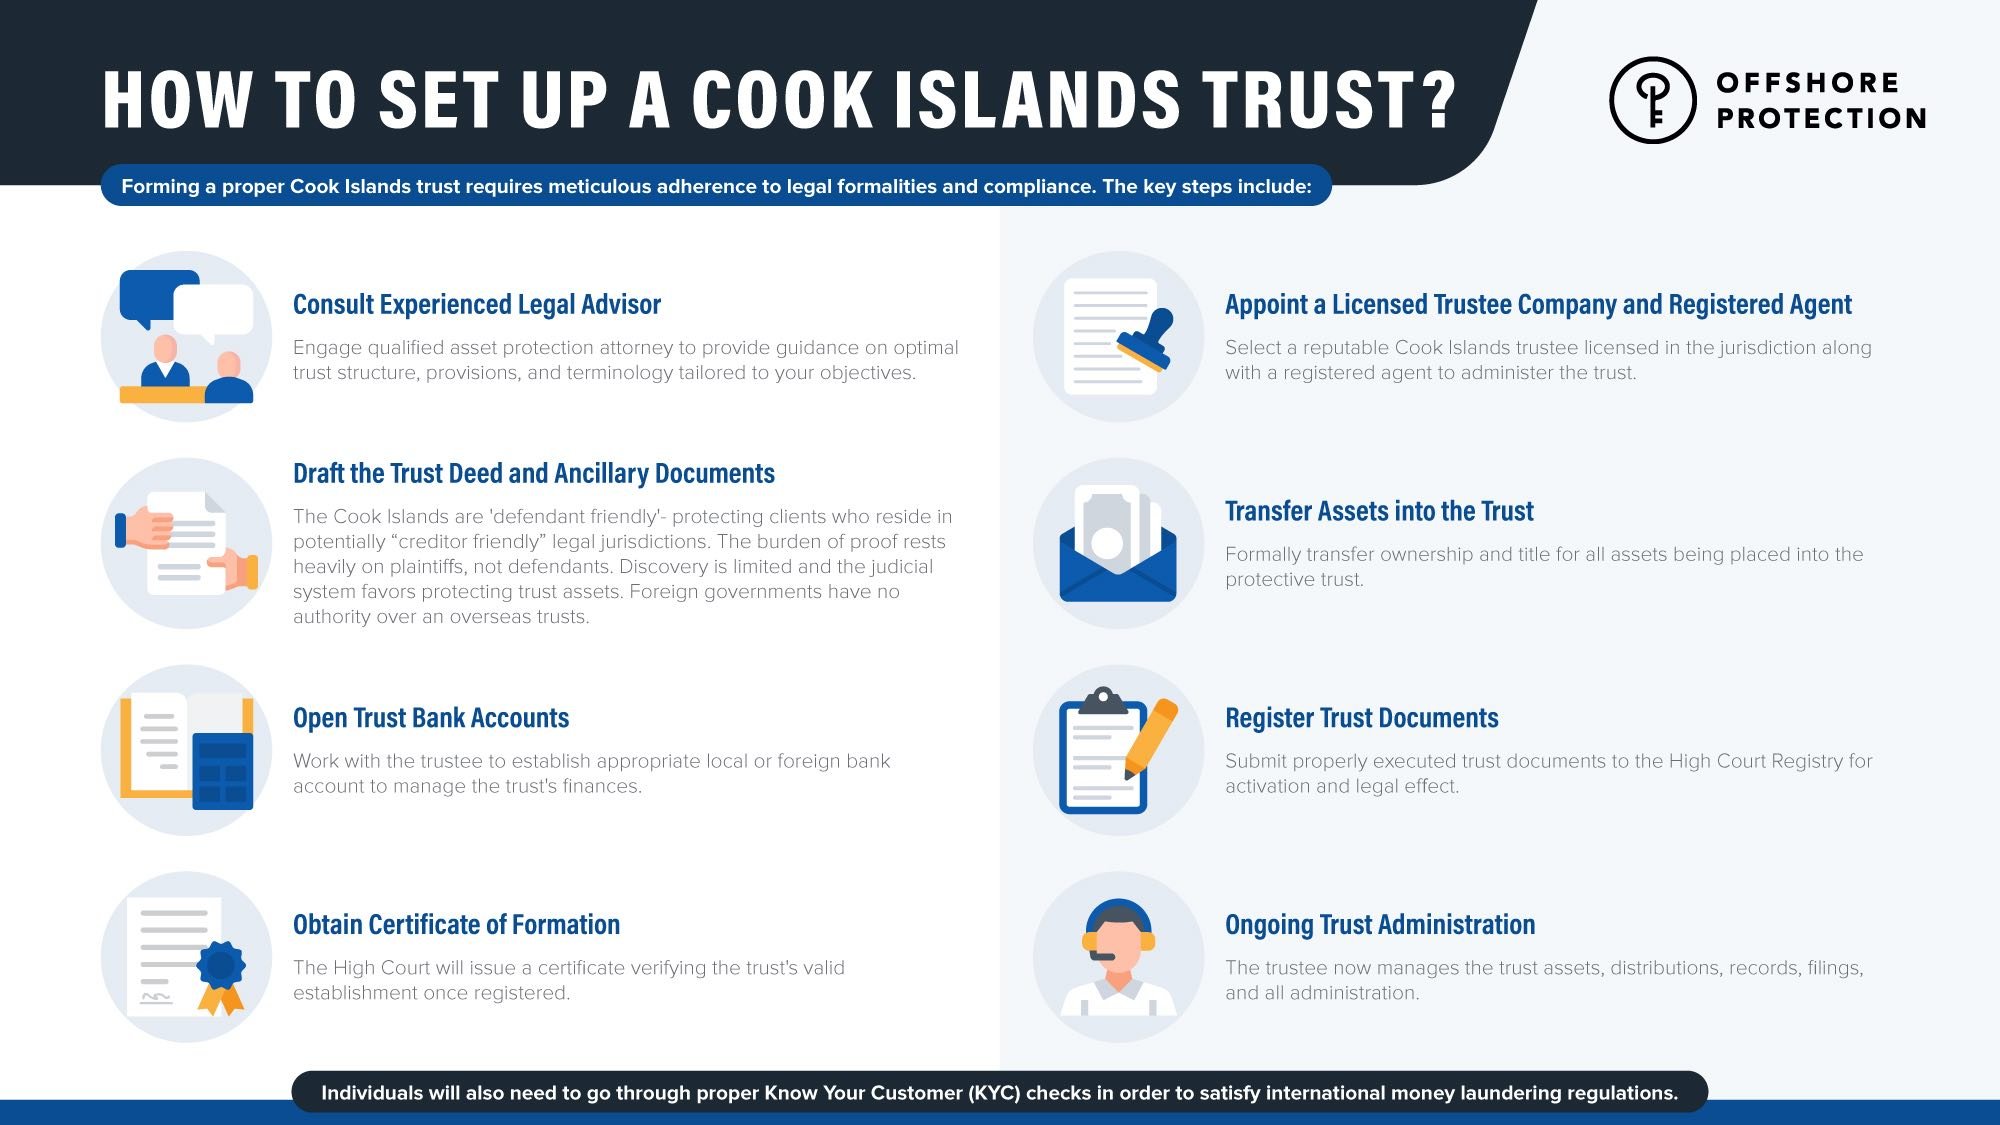 how to setup a cook islands trust infopgraphic.jpg